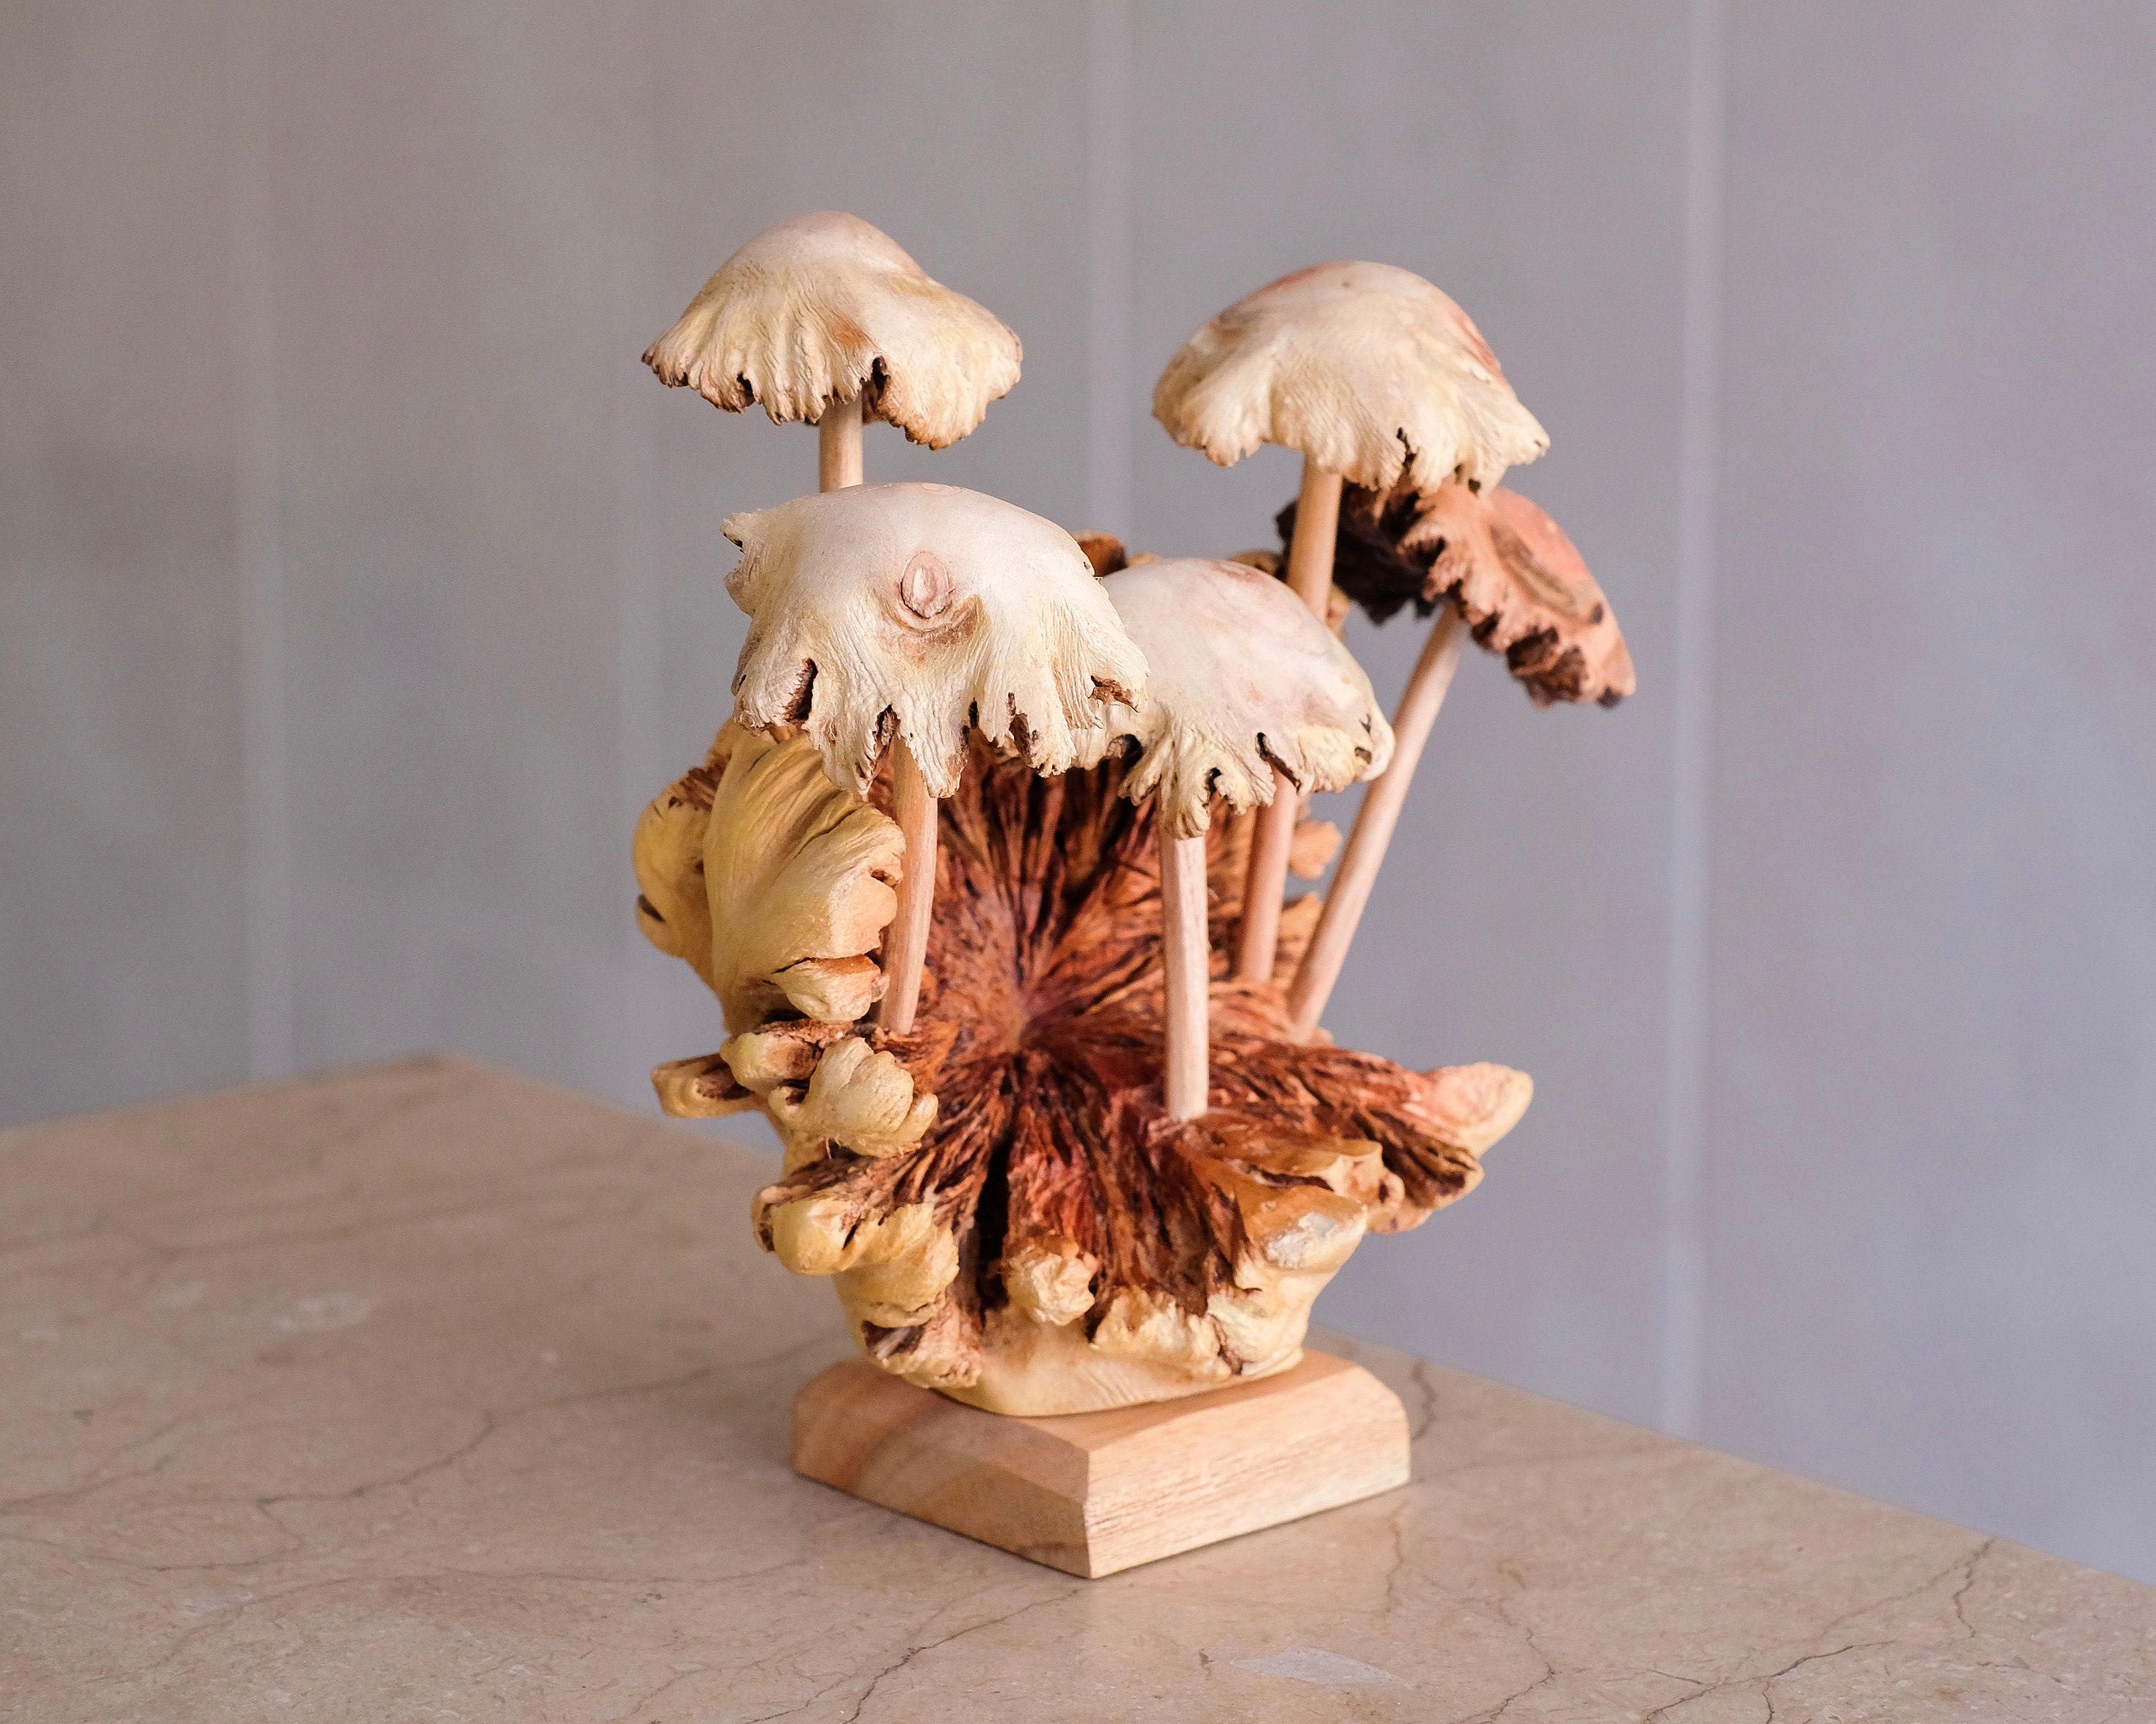 Figurine, Mushrooms, Carved Wood Sculptures, American, 20th Century –  George Glazer Gallery, Antiques